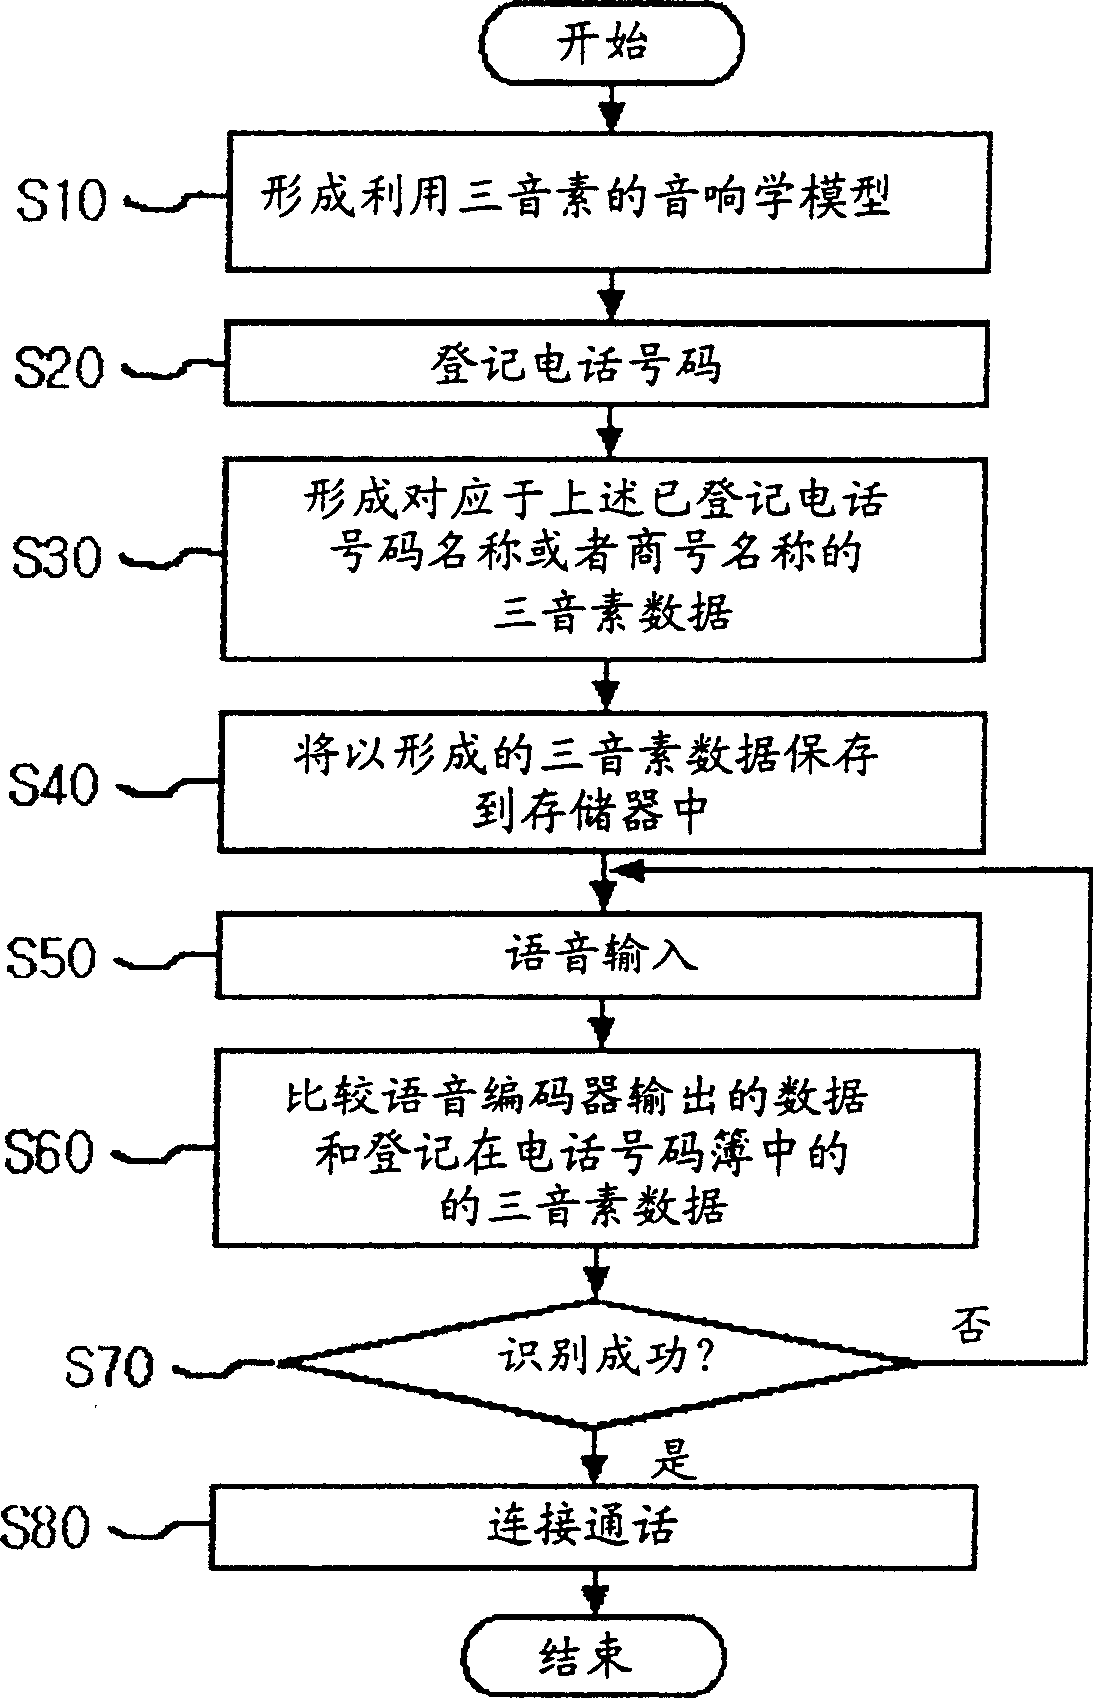 Speech recognition of mobile telecommunication terminal